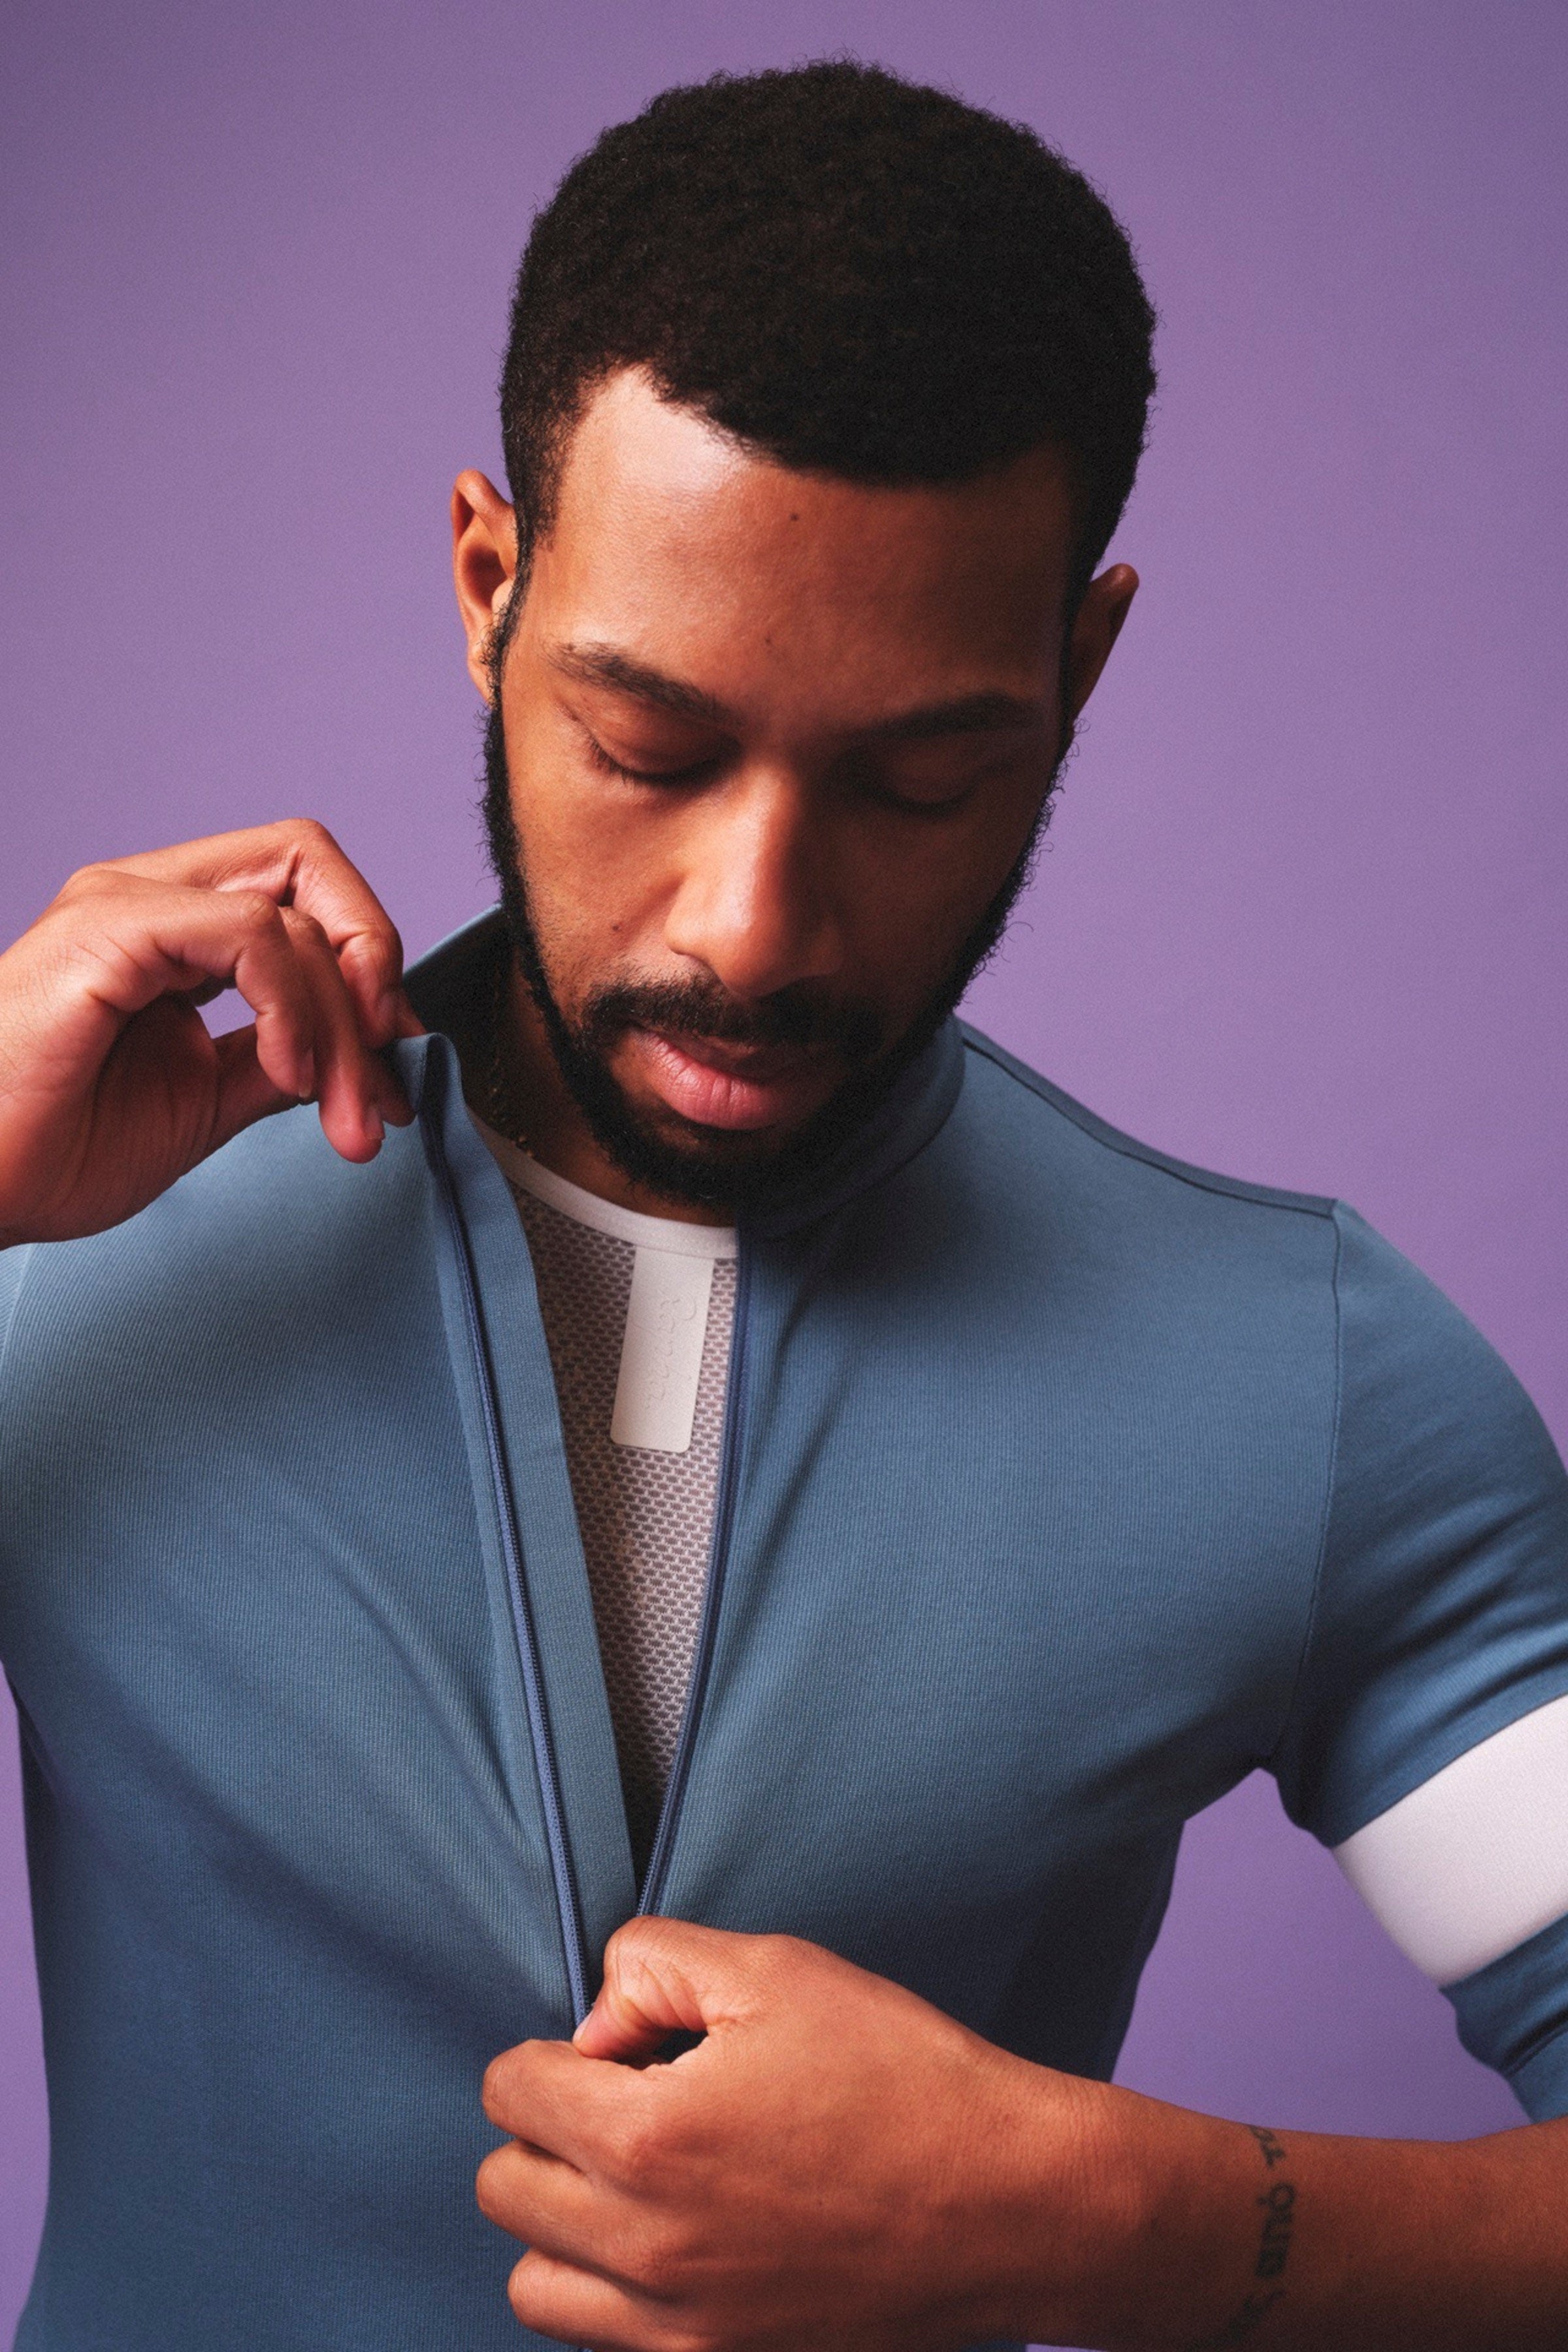 Stylish cyclist zipping up a blue Rapha Core Collection jersey for a comfortable all-day ride @ Bici.